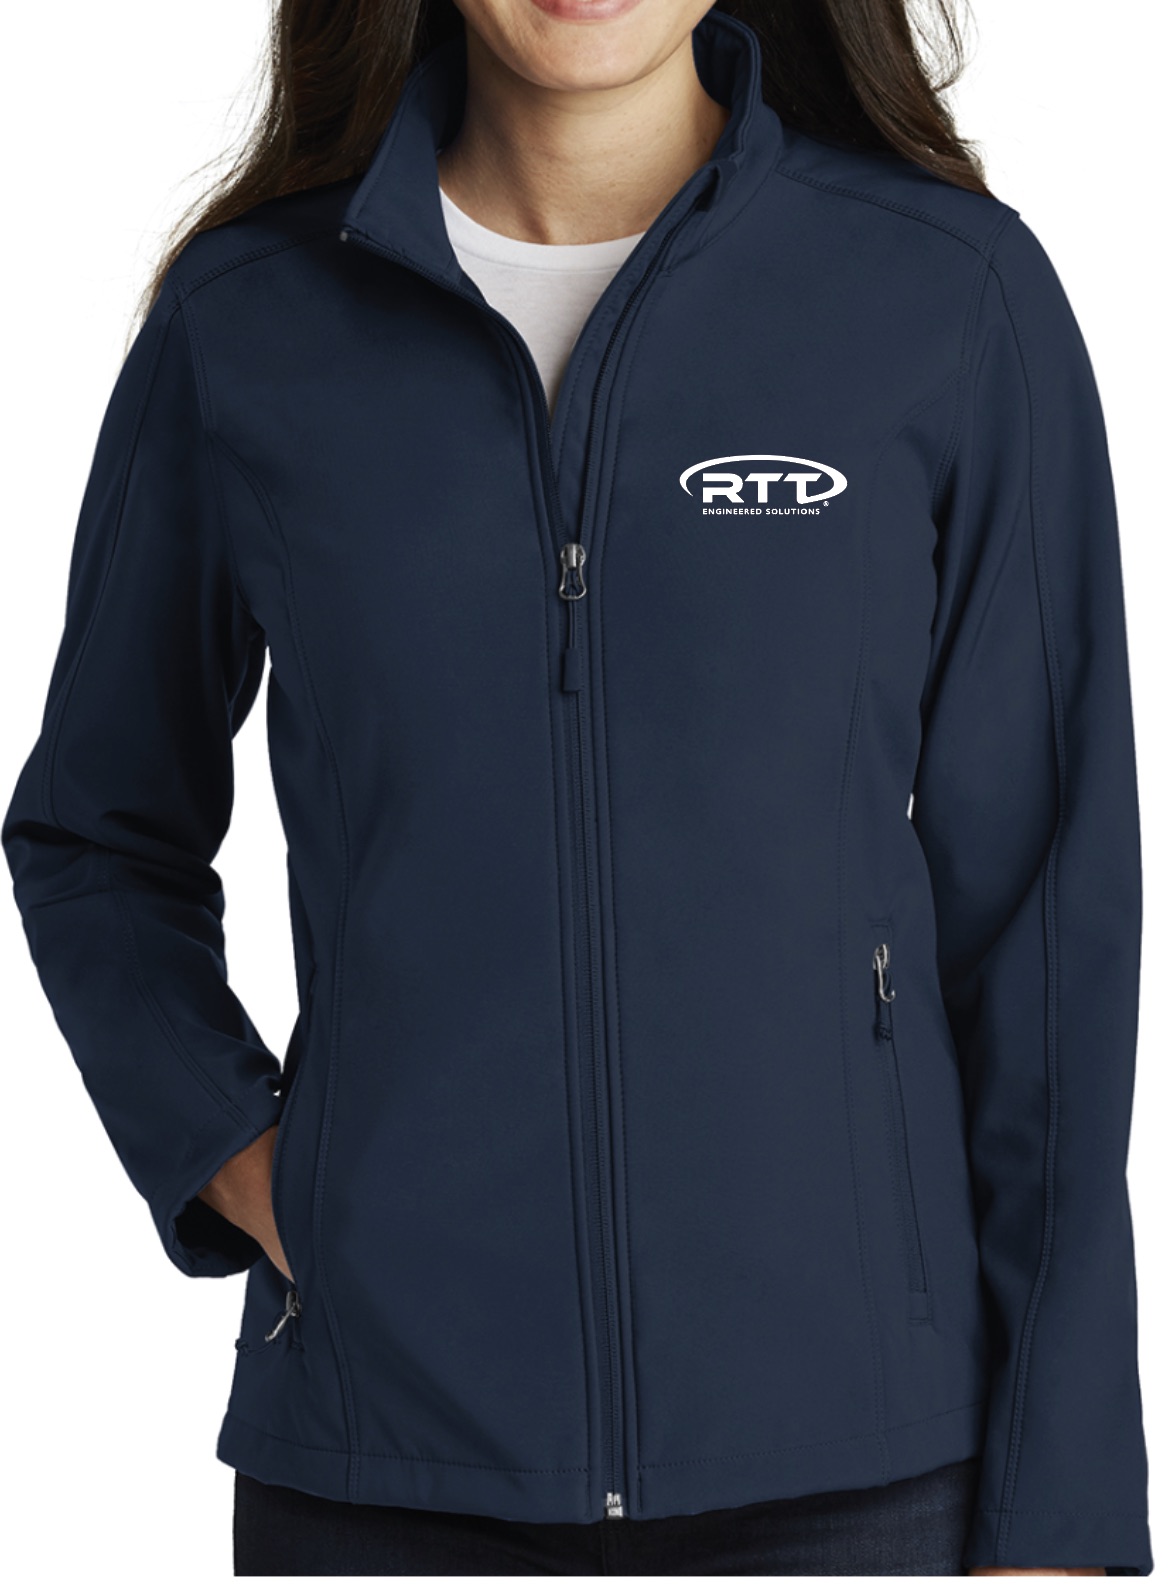 Port Authority Ladies Core Soft Shell Jacket (Co-branded)